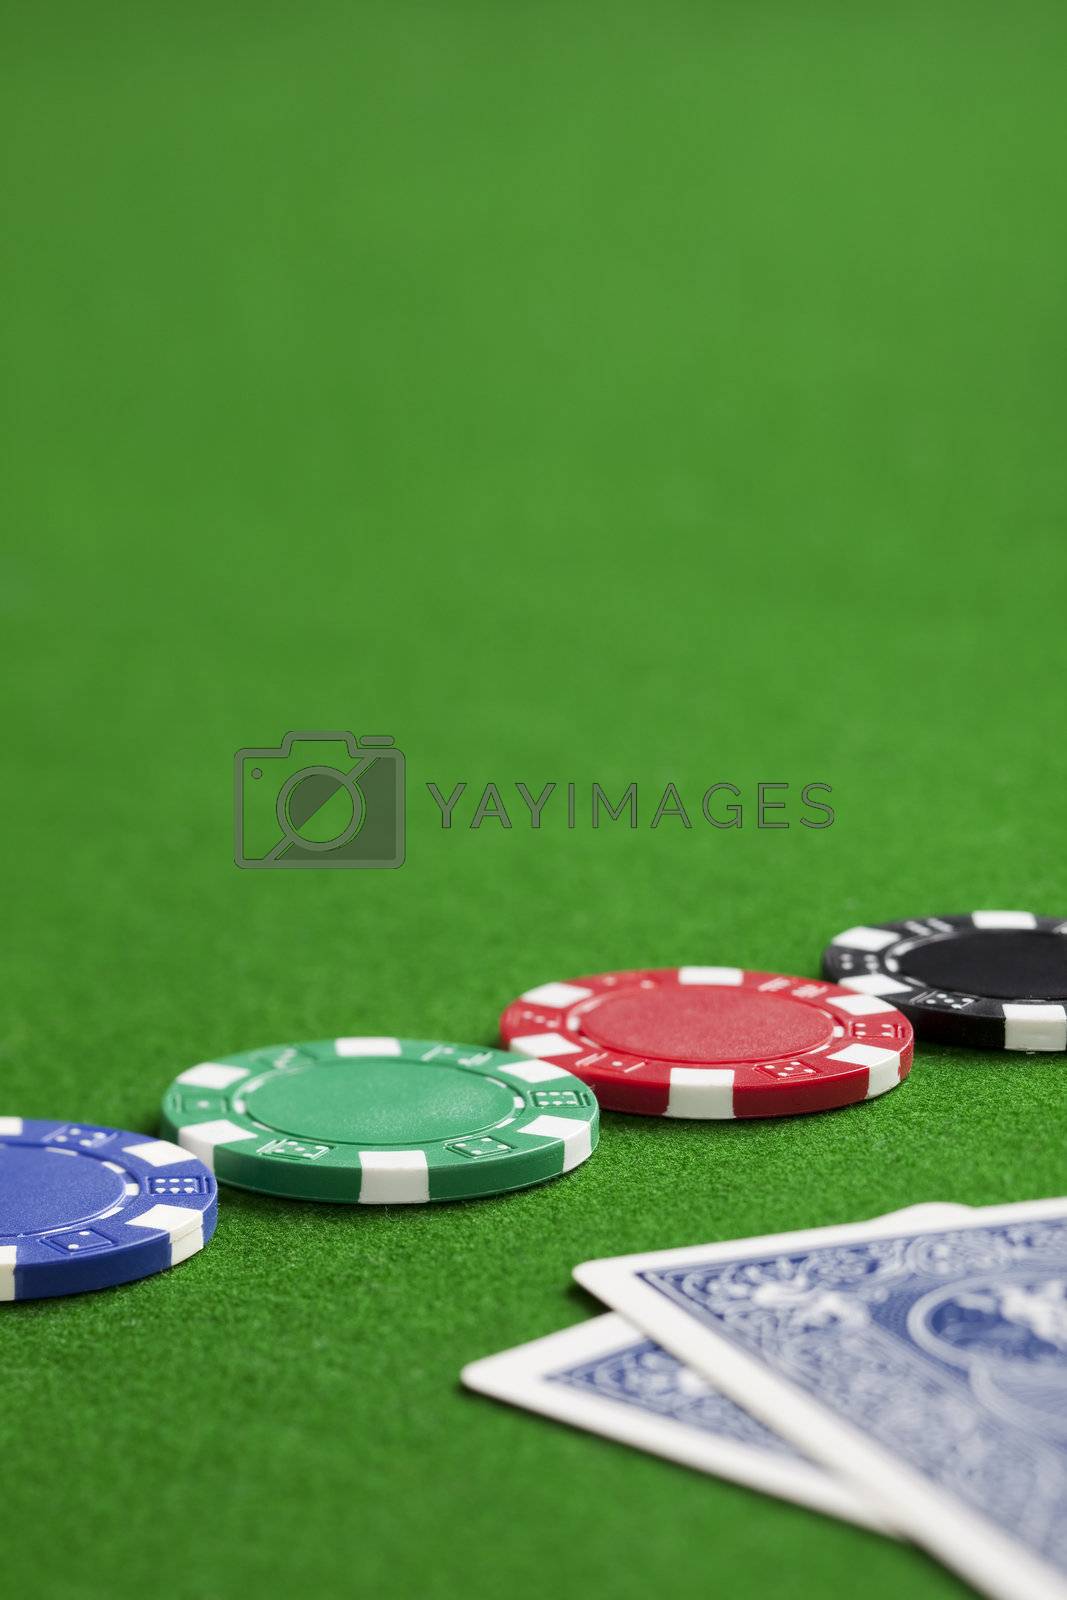 Royalty free image of Playing poker by mjp